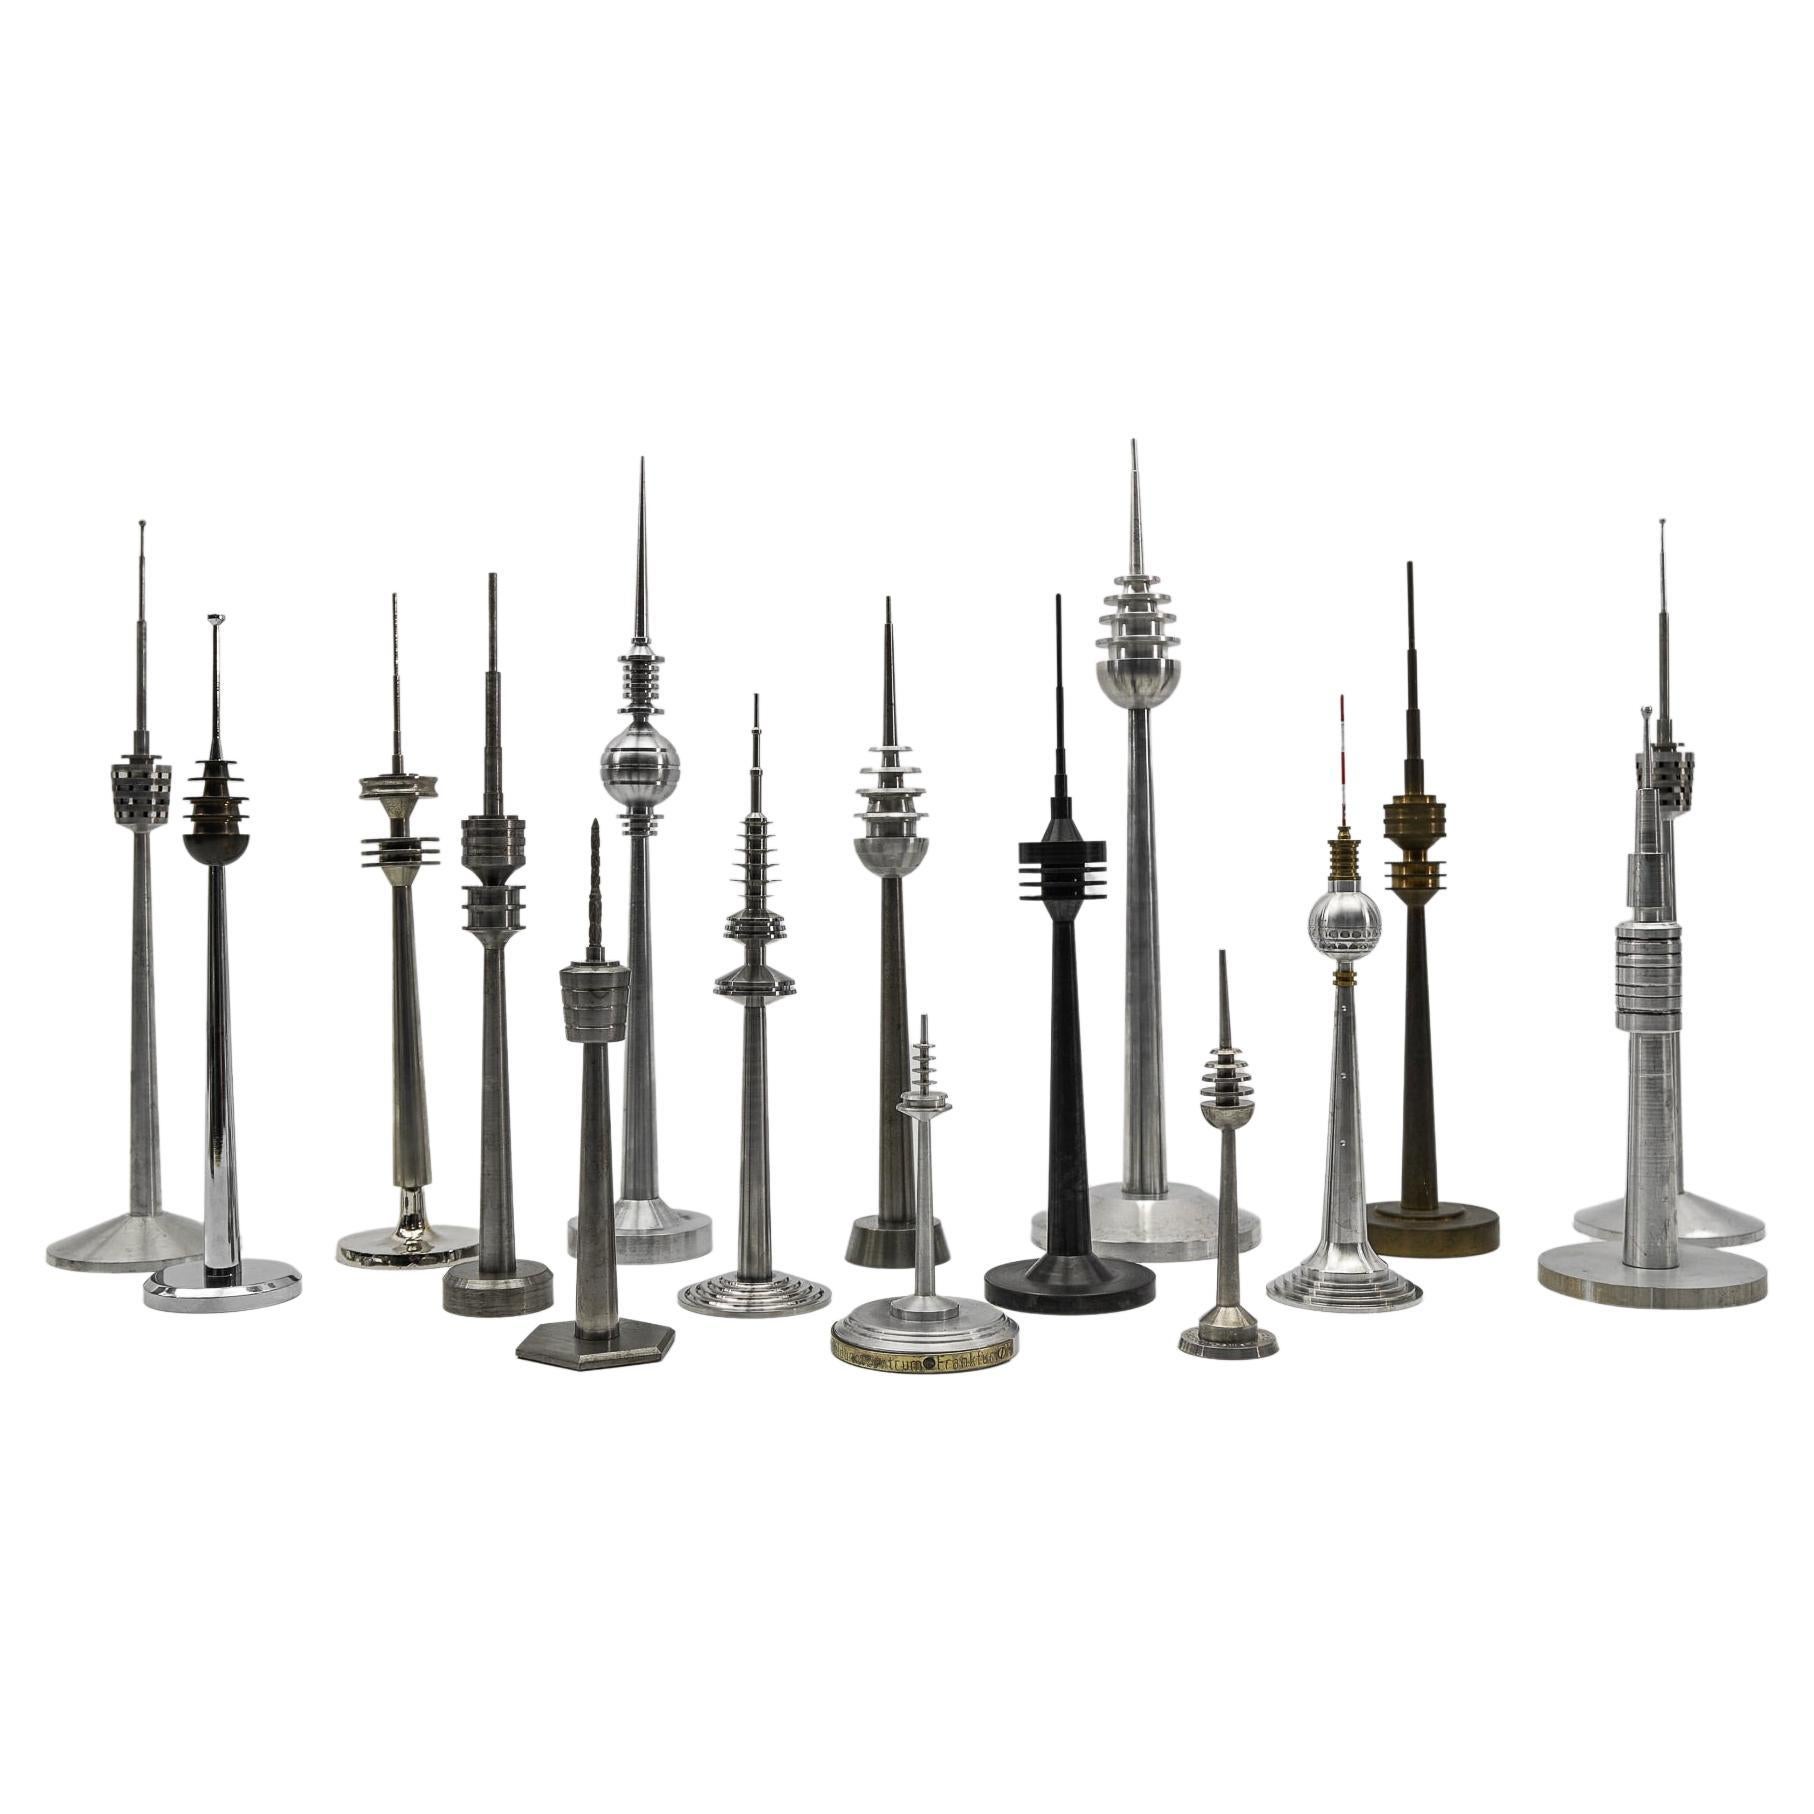 Large Collection of 16 Different Tv-Towers Made in Metal, Steel and Aluminium